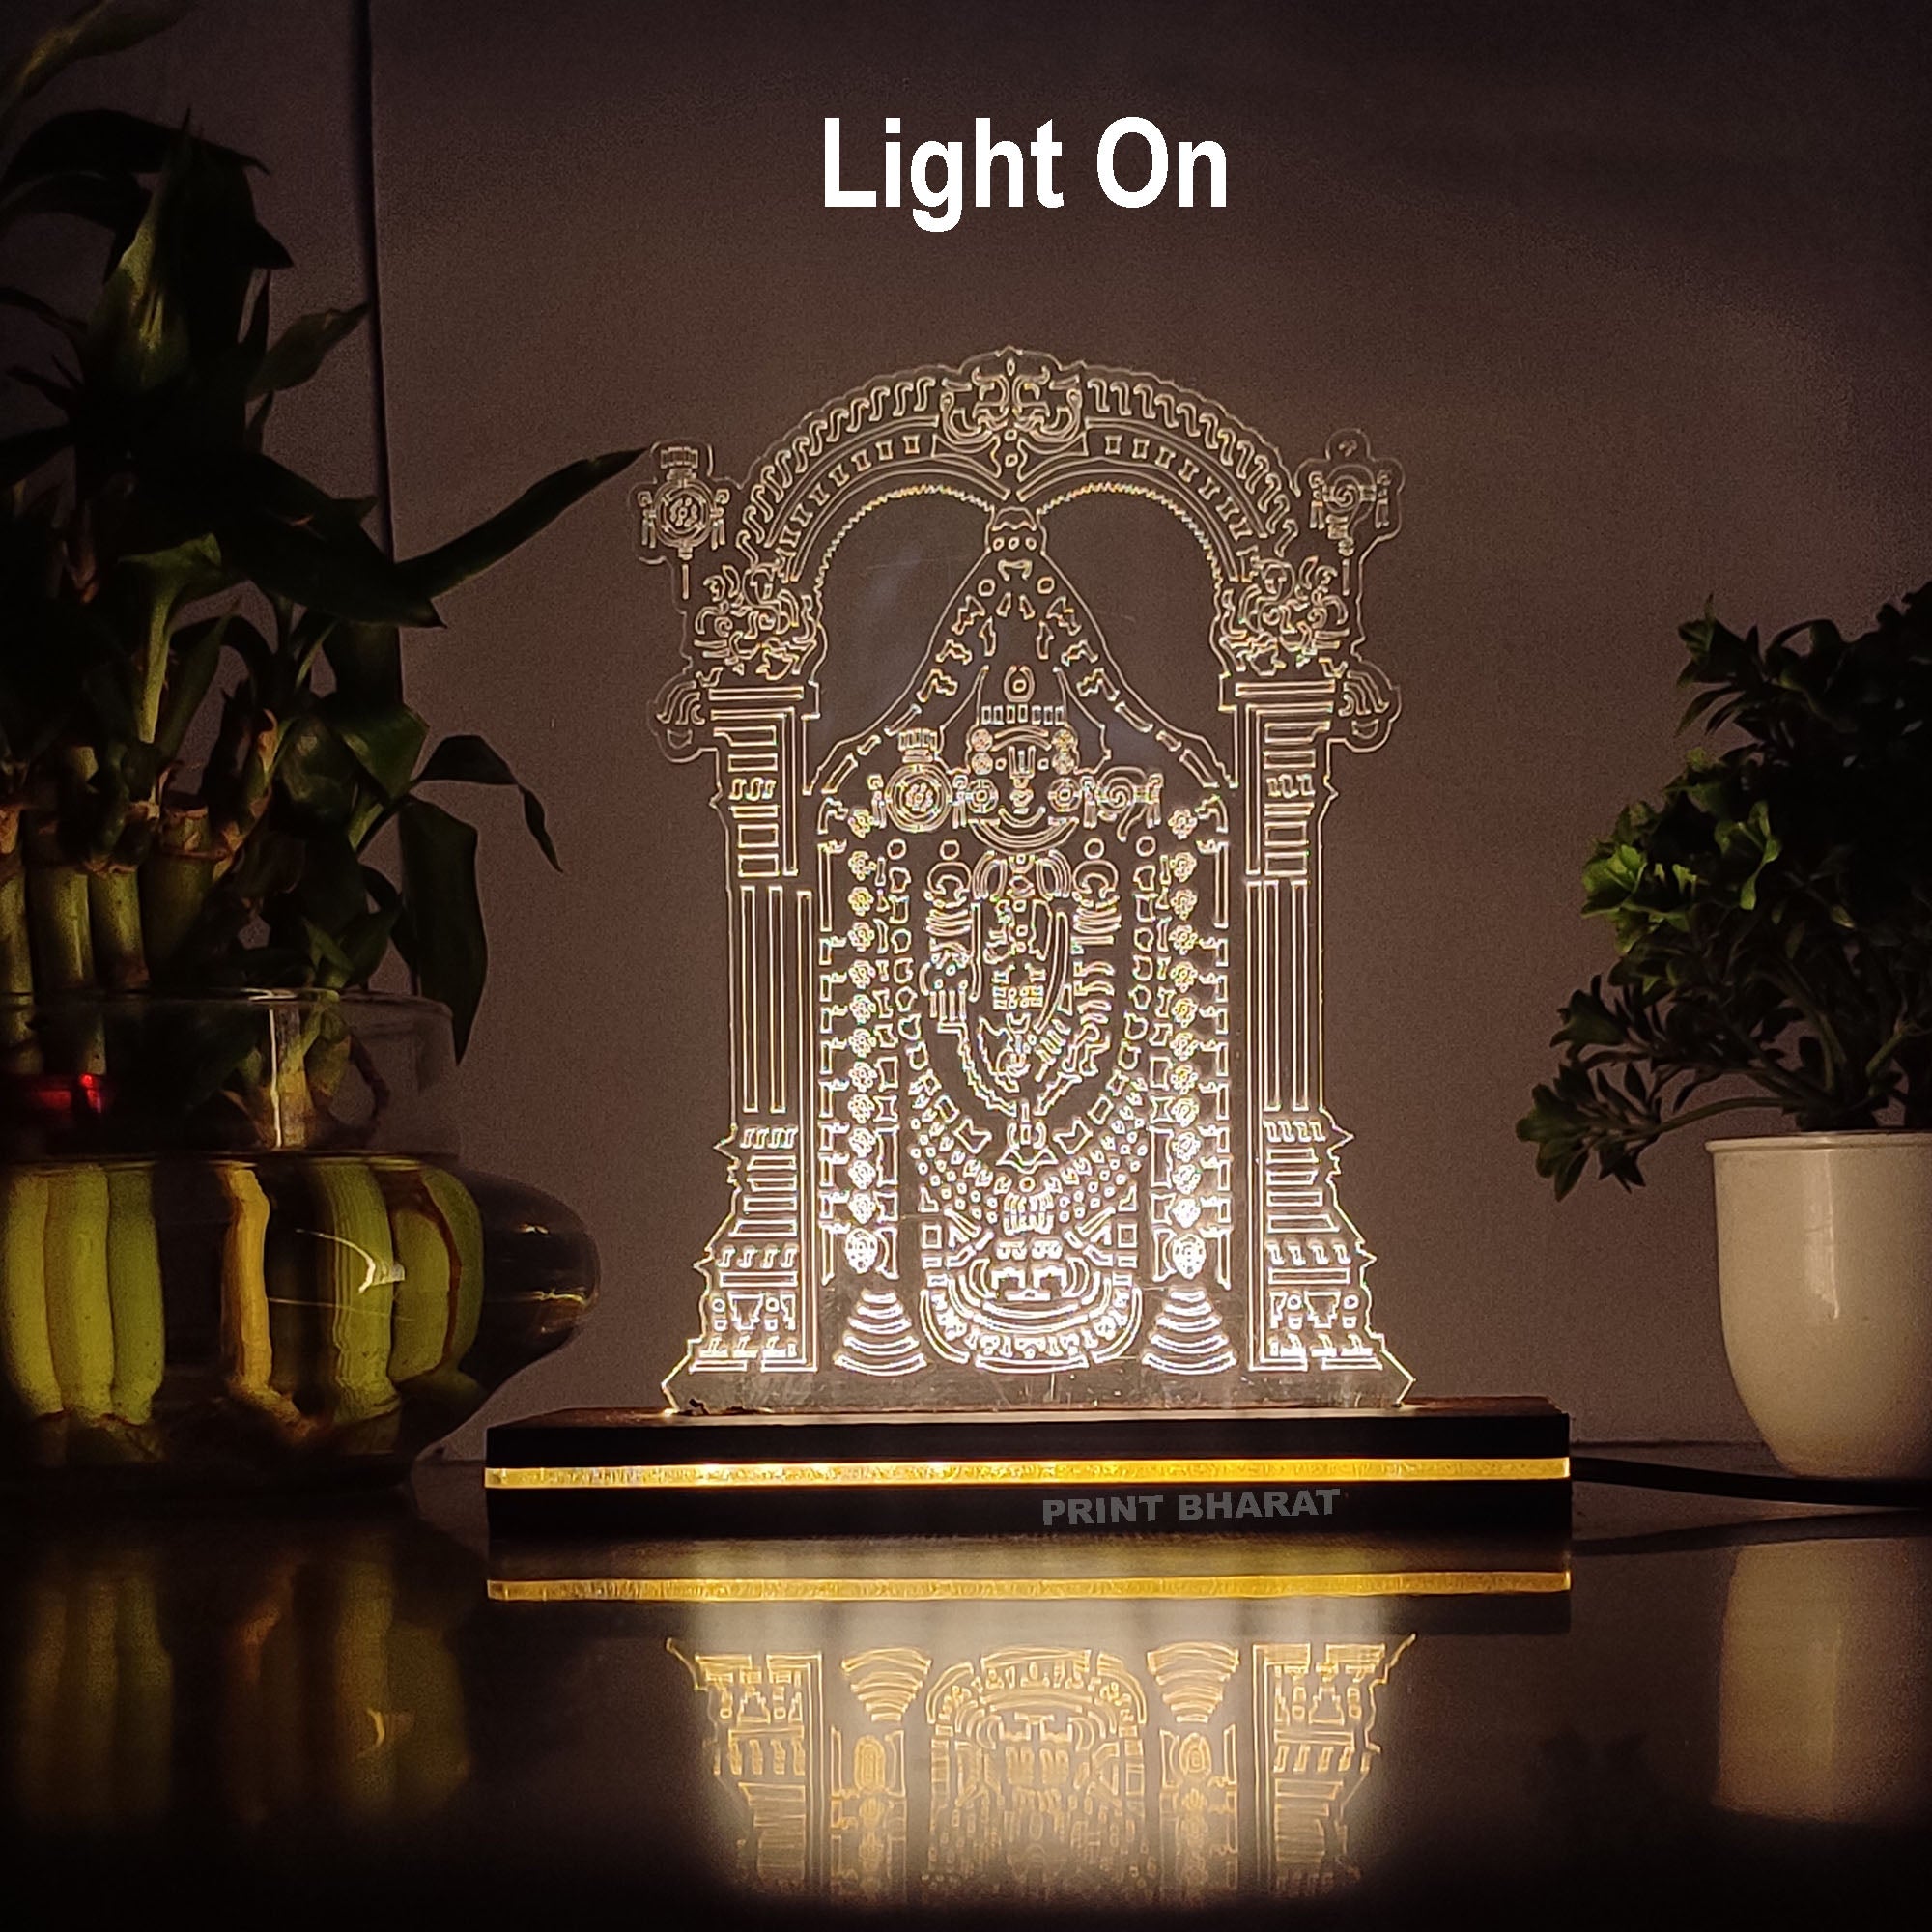 "ACRYLIC BALA JI LED: Exquisite LED Art for Your Home Decor | My Interior Factory"